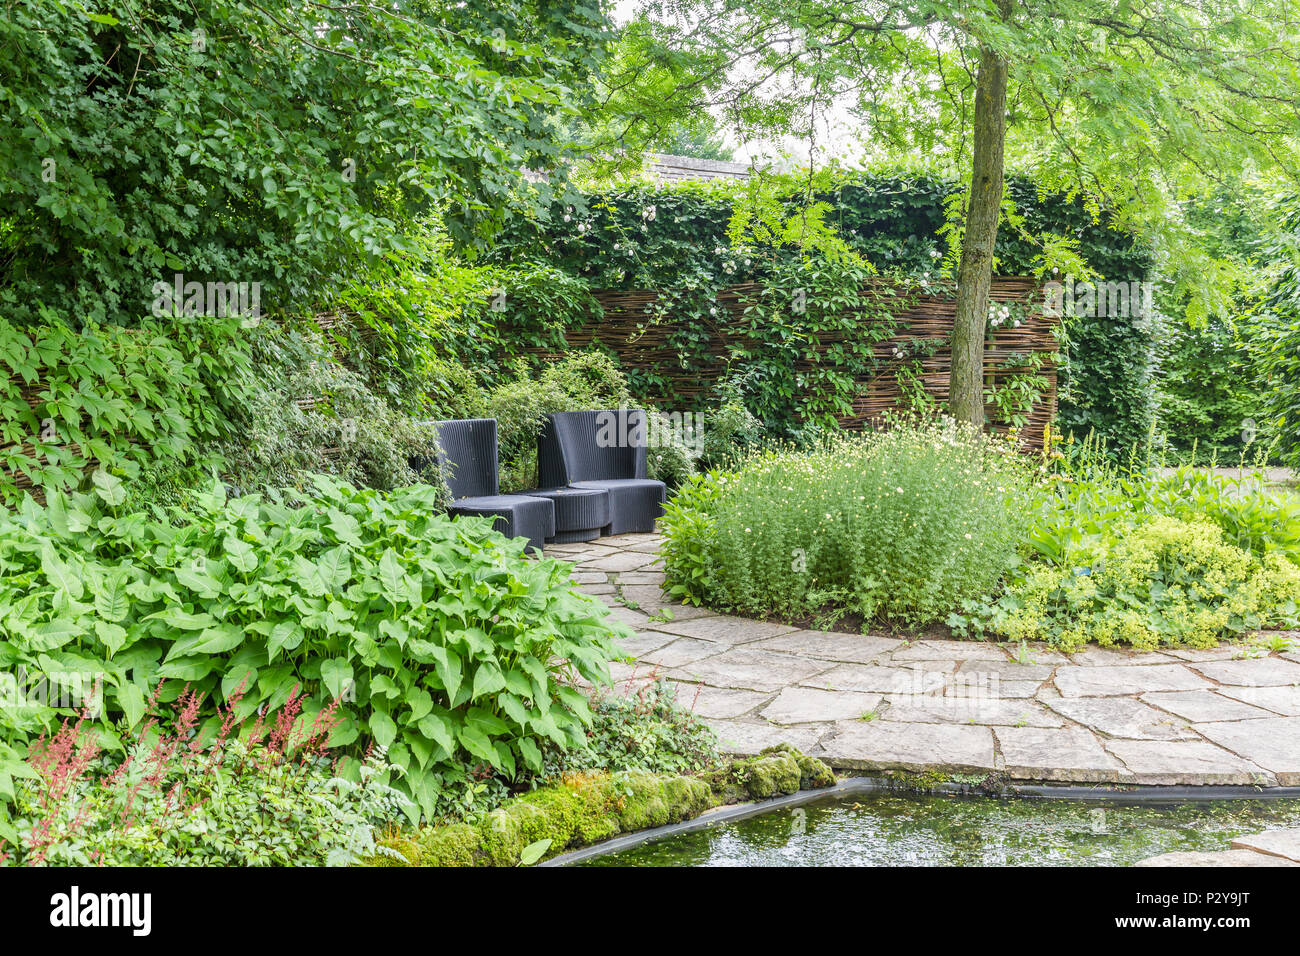 Garden design with water elements Stock Photo